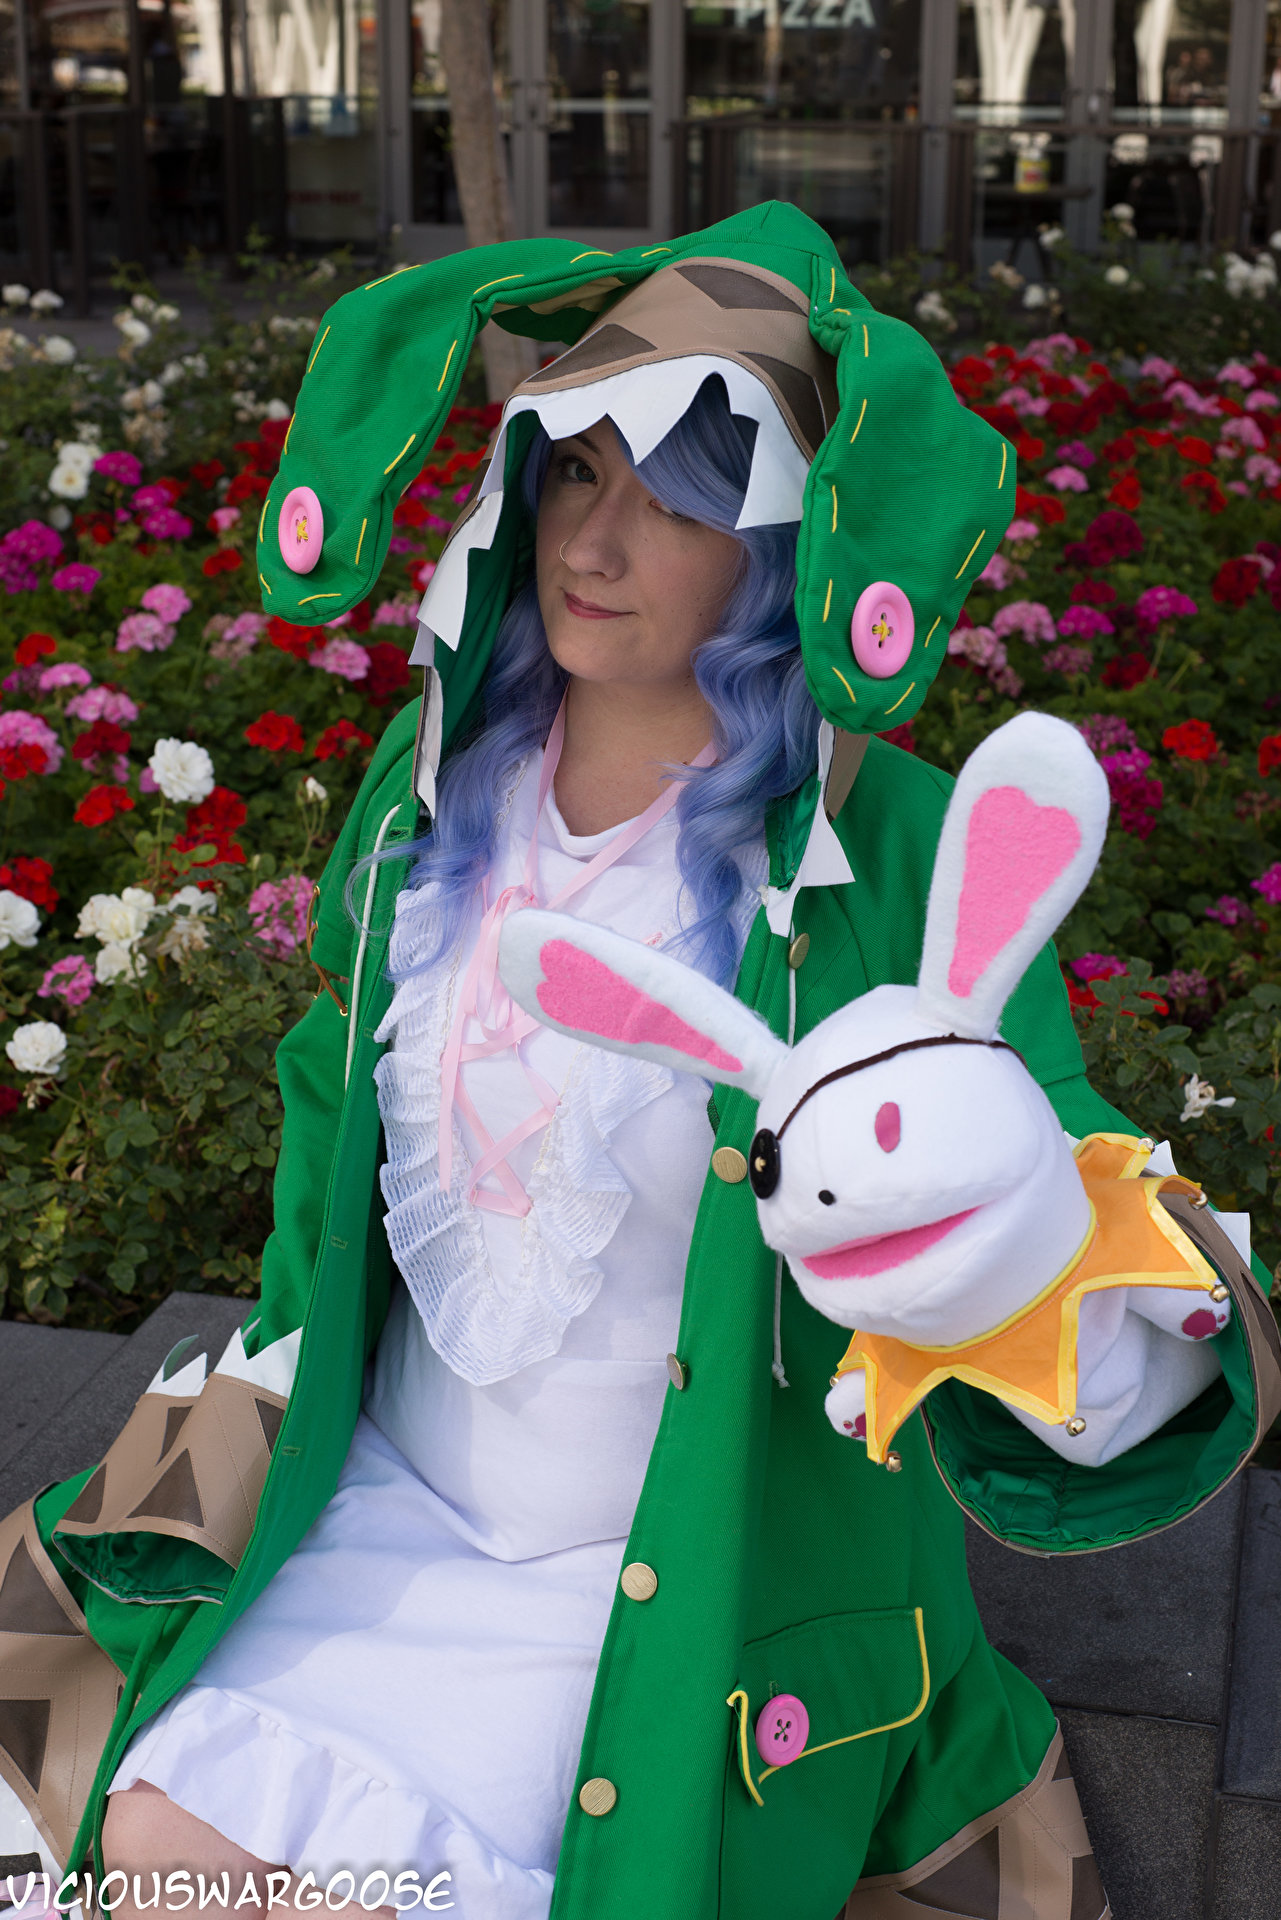 Cospix.net photo featuring Royal Goldfish Cosplay